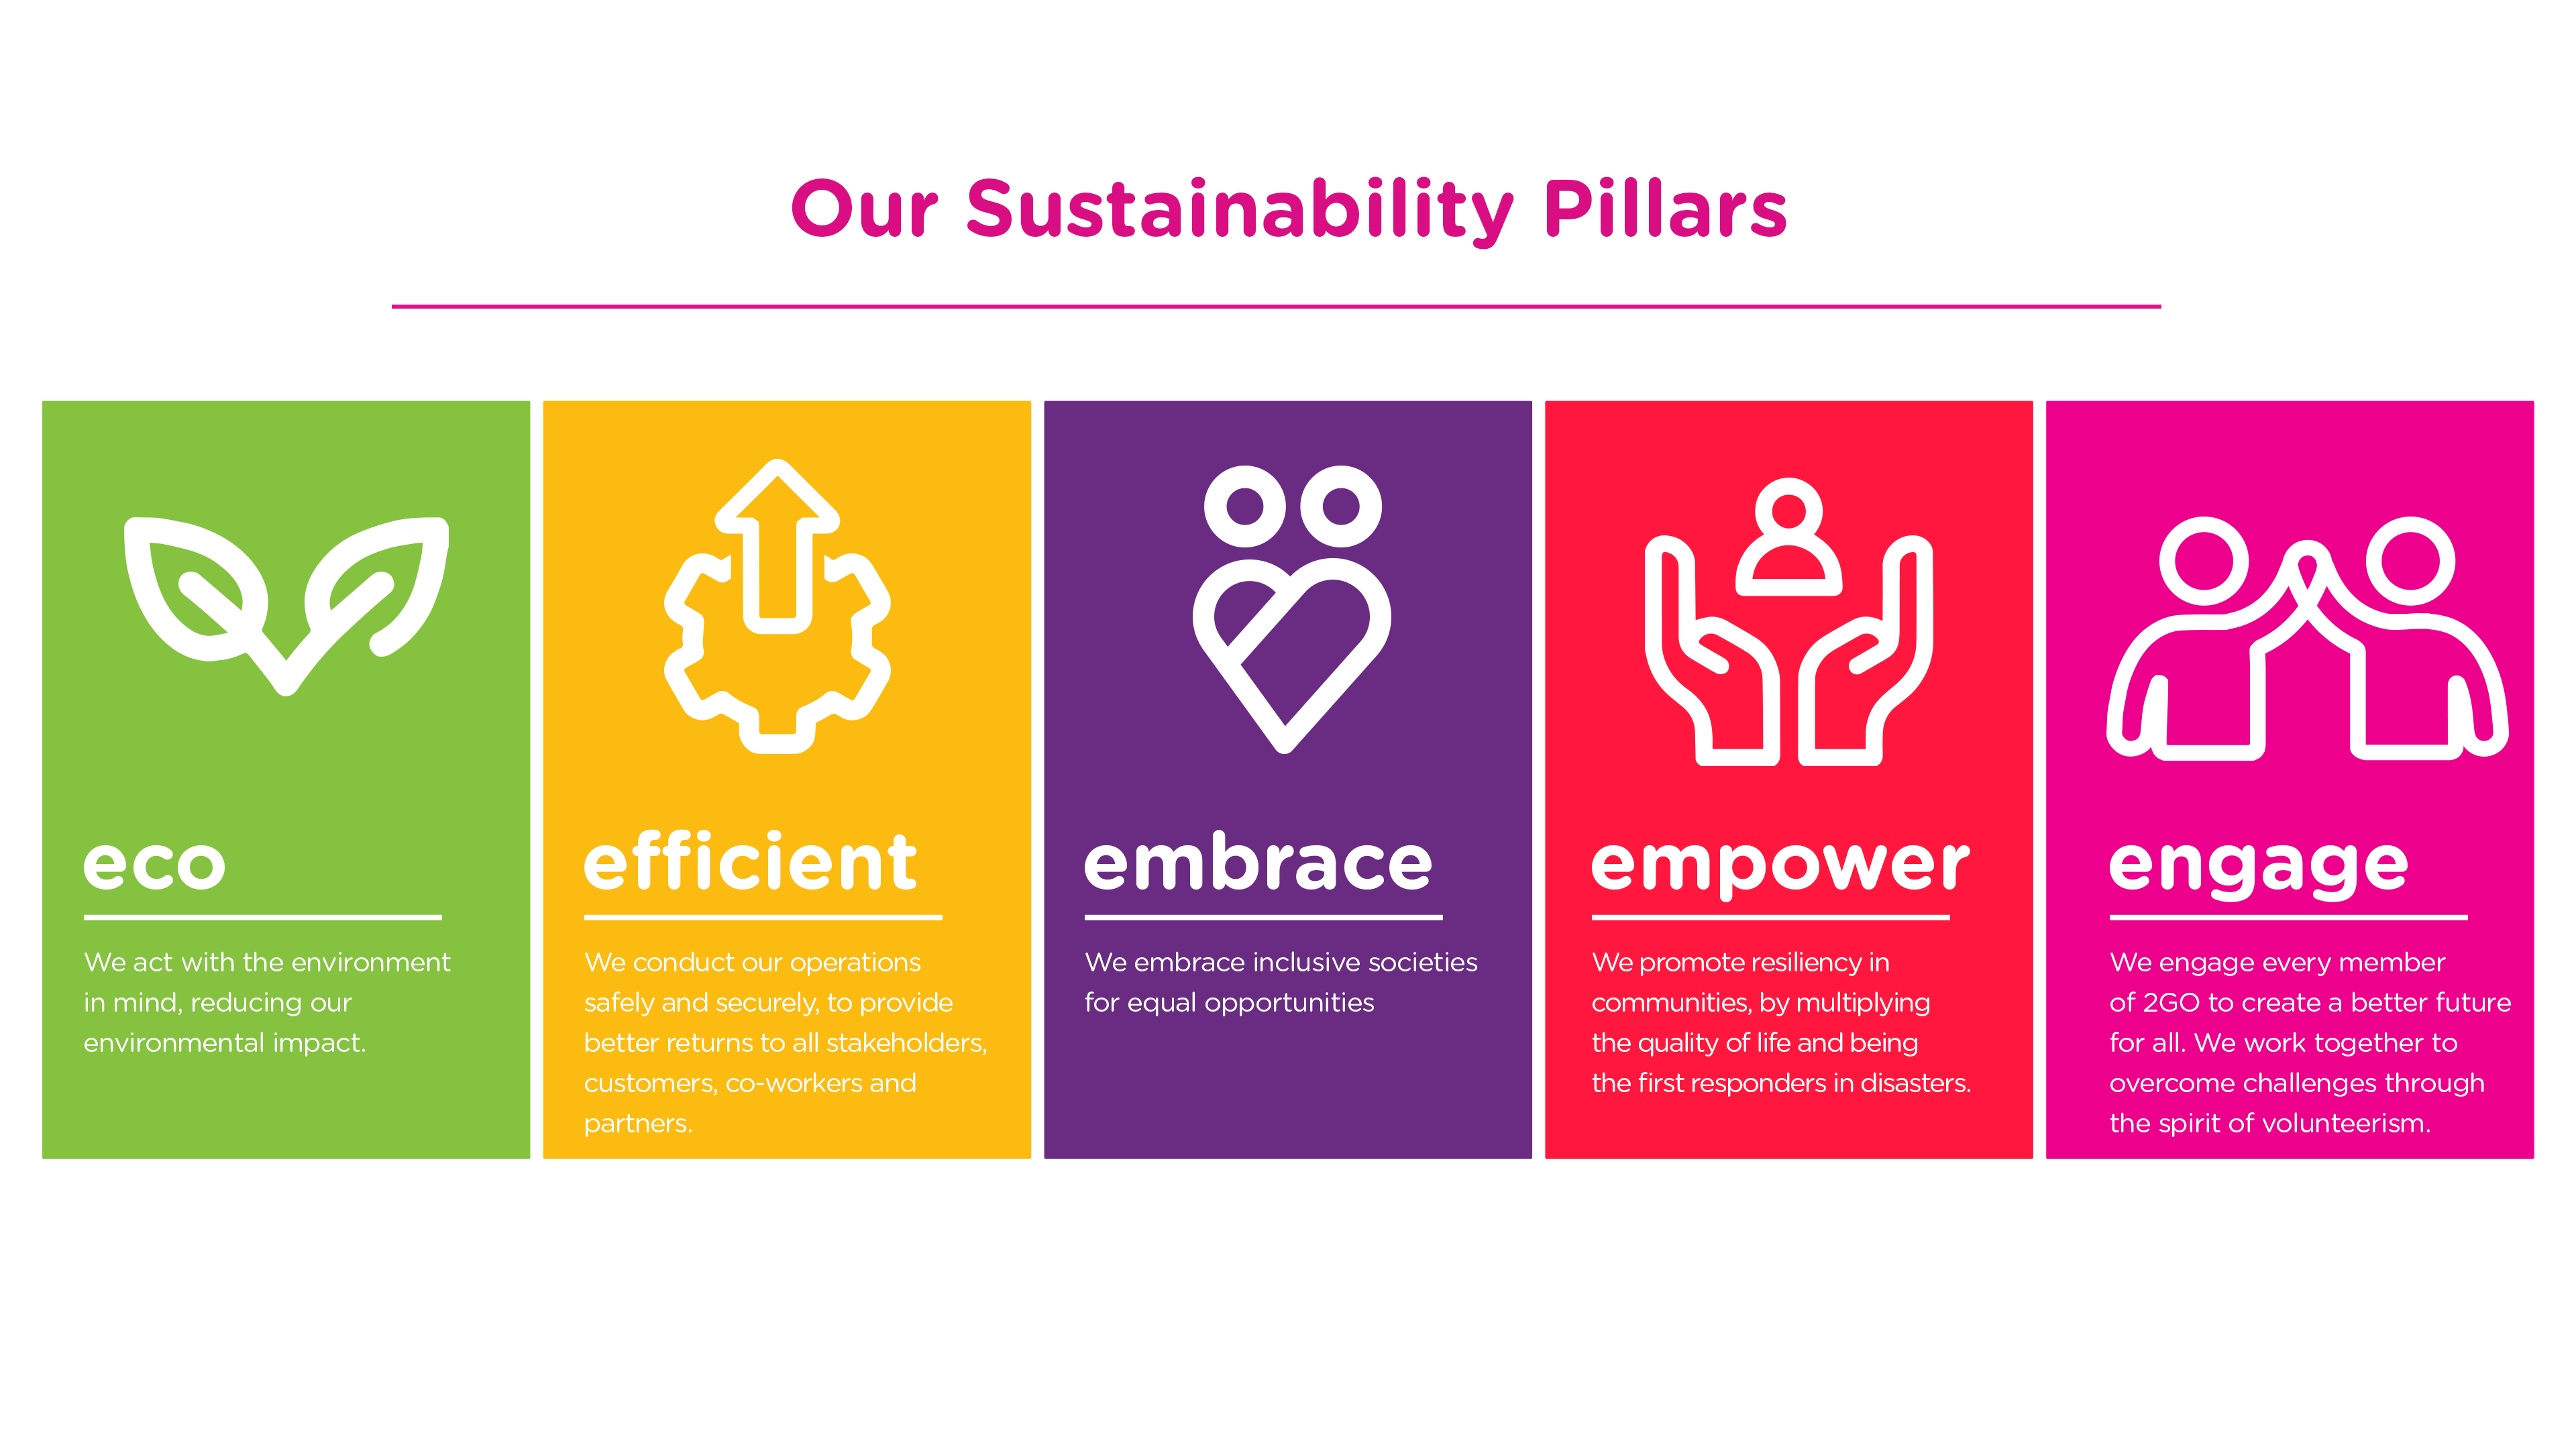 3 - Our Sustainability Pillars